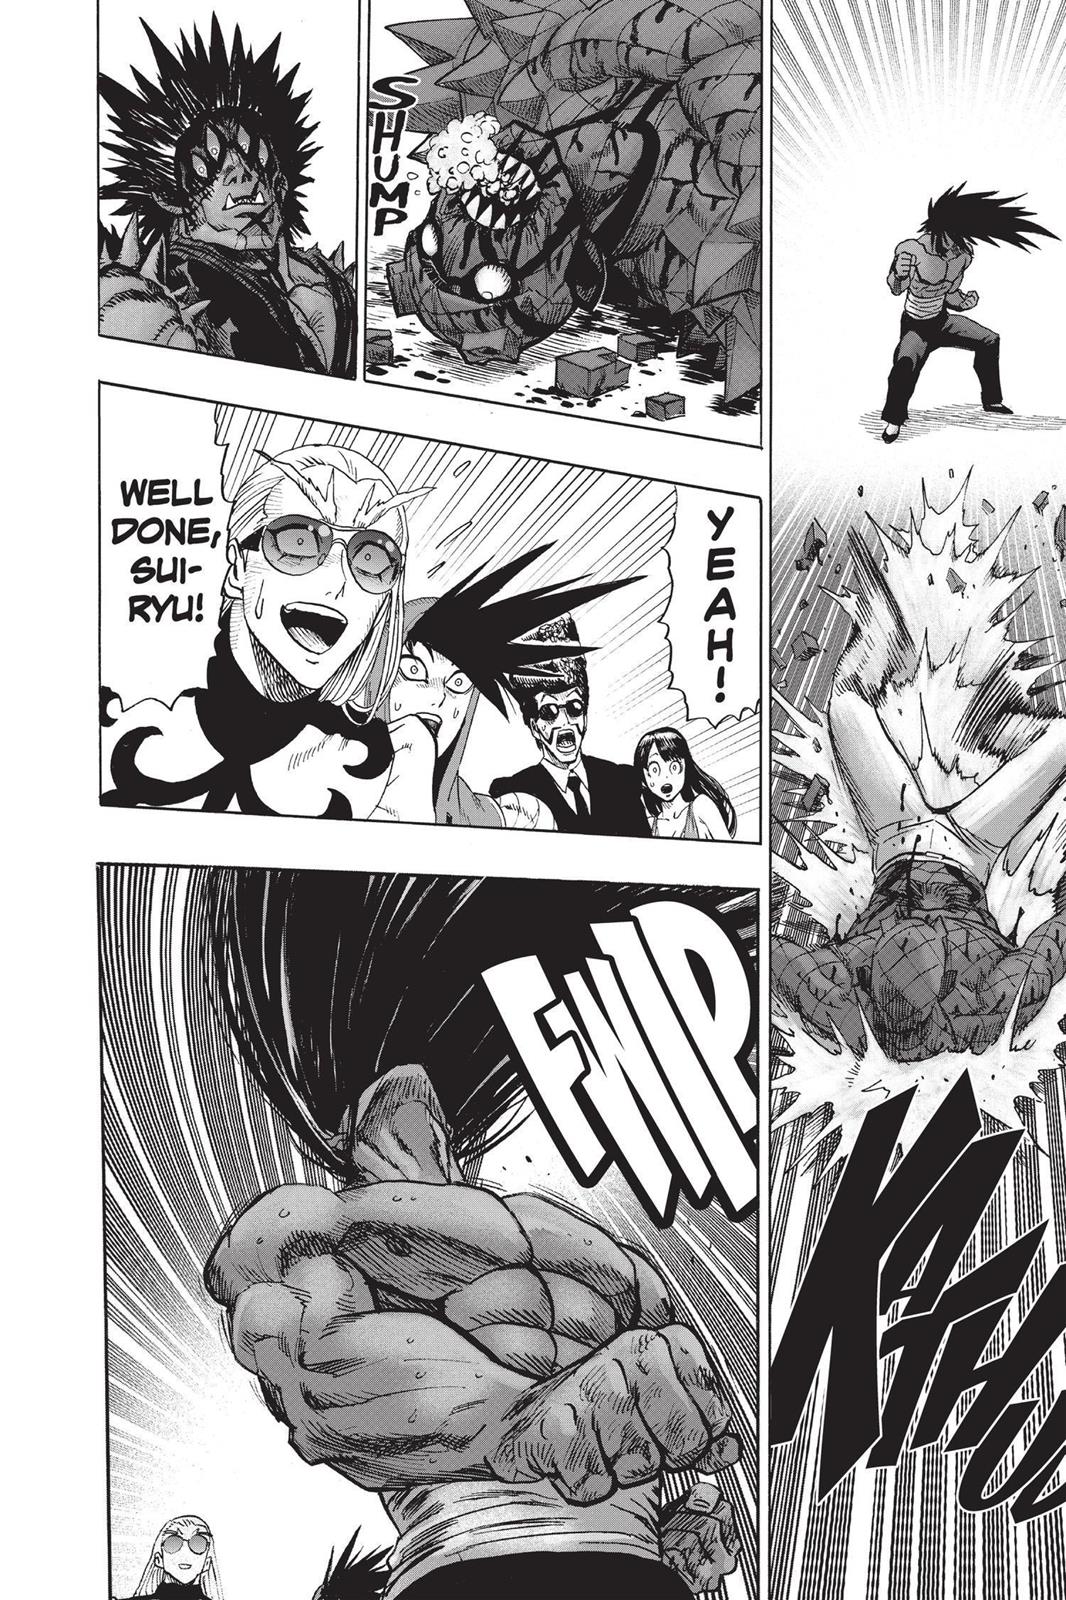 One-Punch Man, Punch 72 image 64